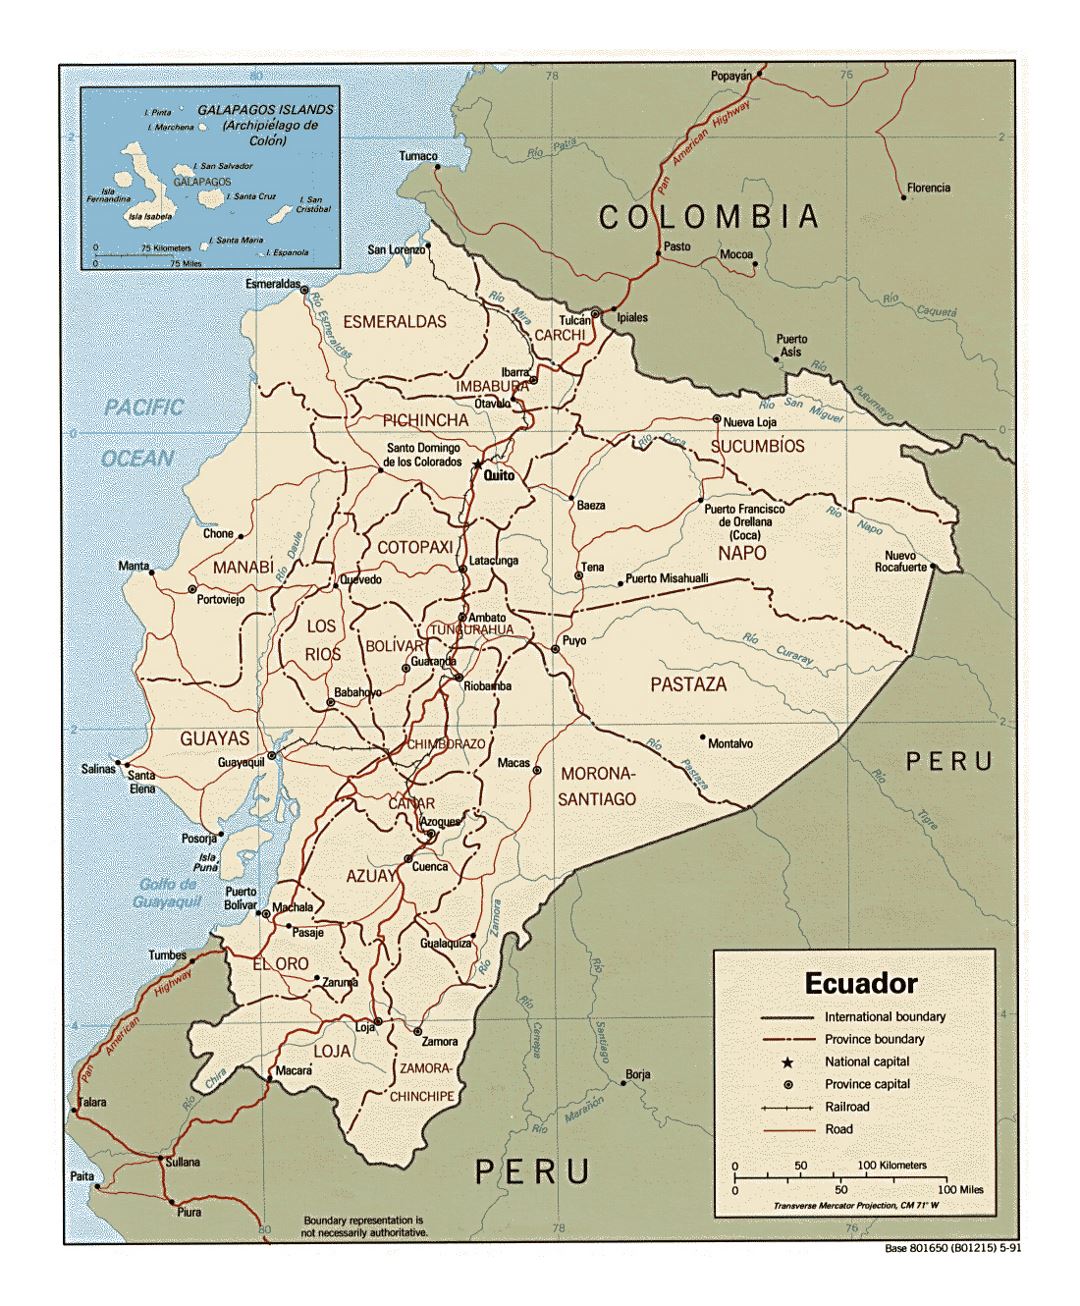 Detailed political and administrative map of Ecuador with major roads and major cities - 1991